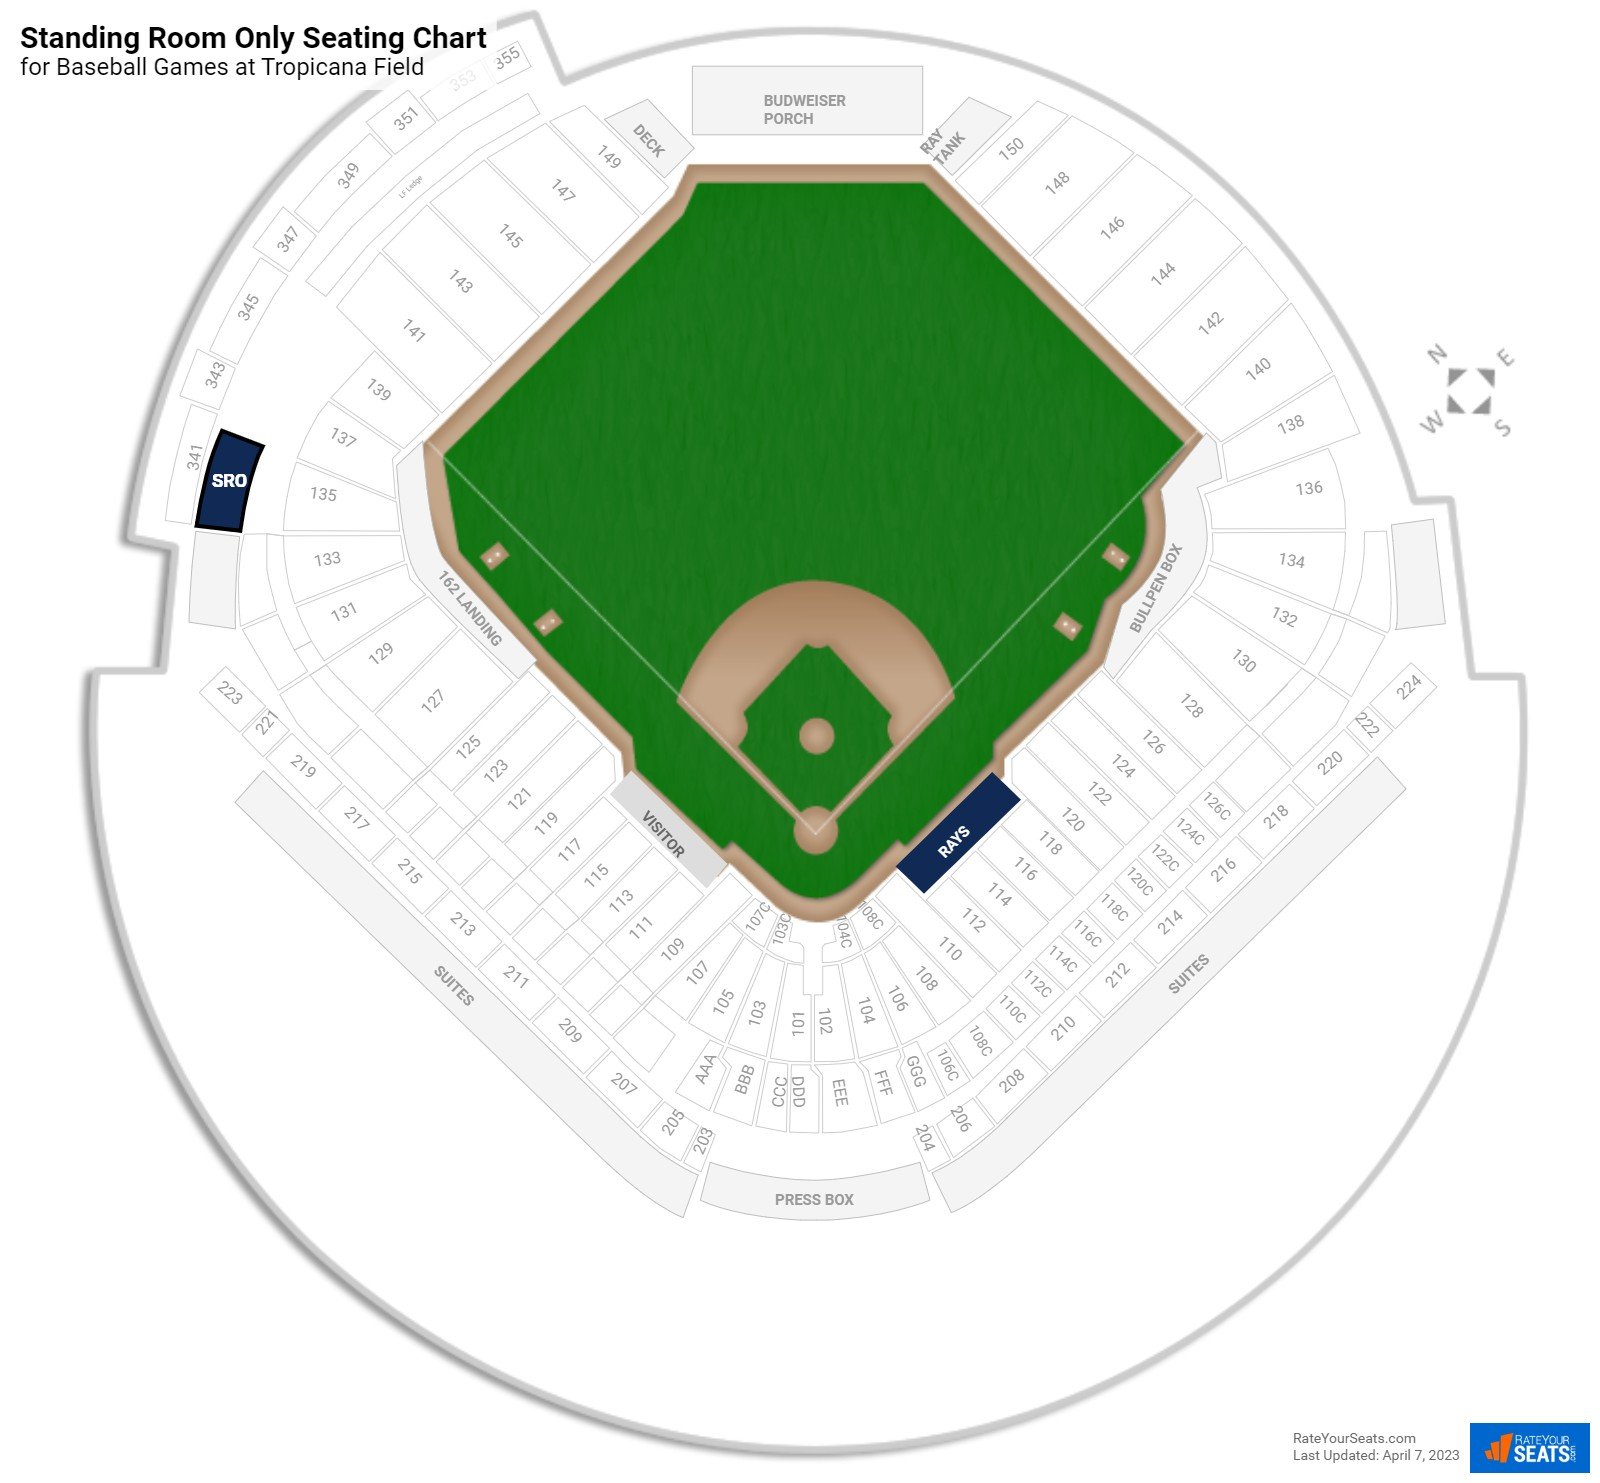 Baseball Standing Room Only Seating Chart at Tropicana Field